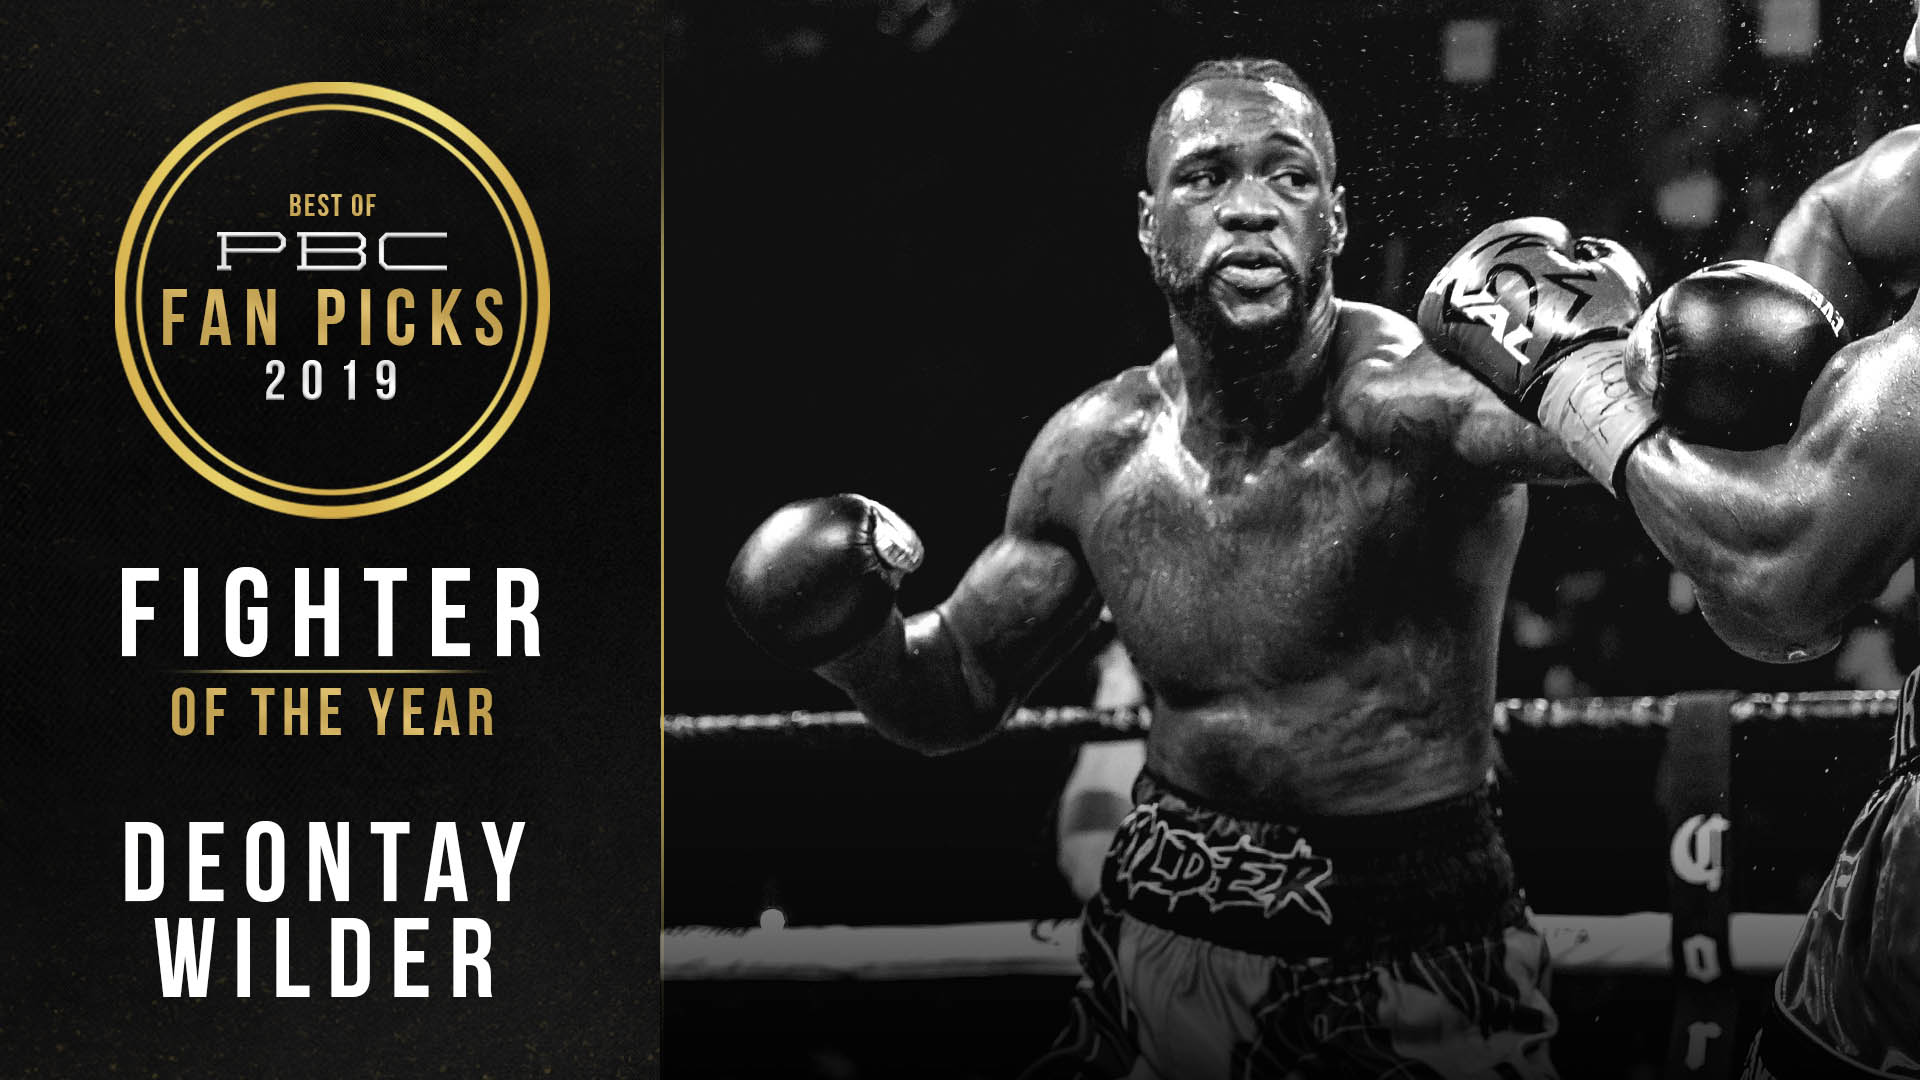 Best of PBC 2019: Fighter of the Year1920 x 1080